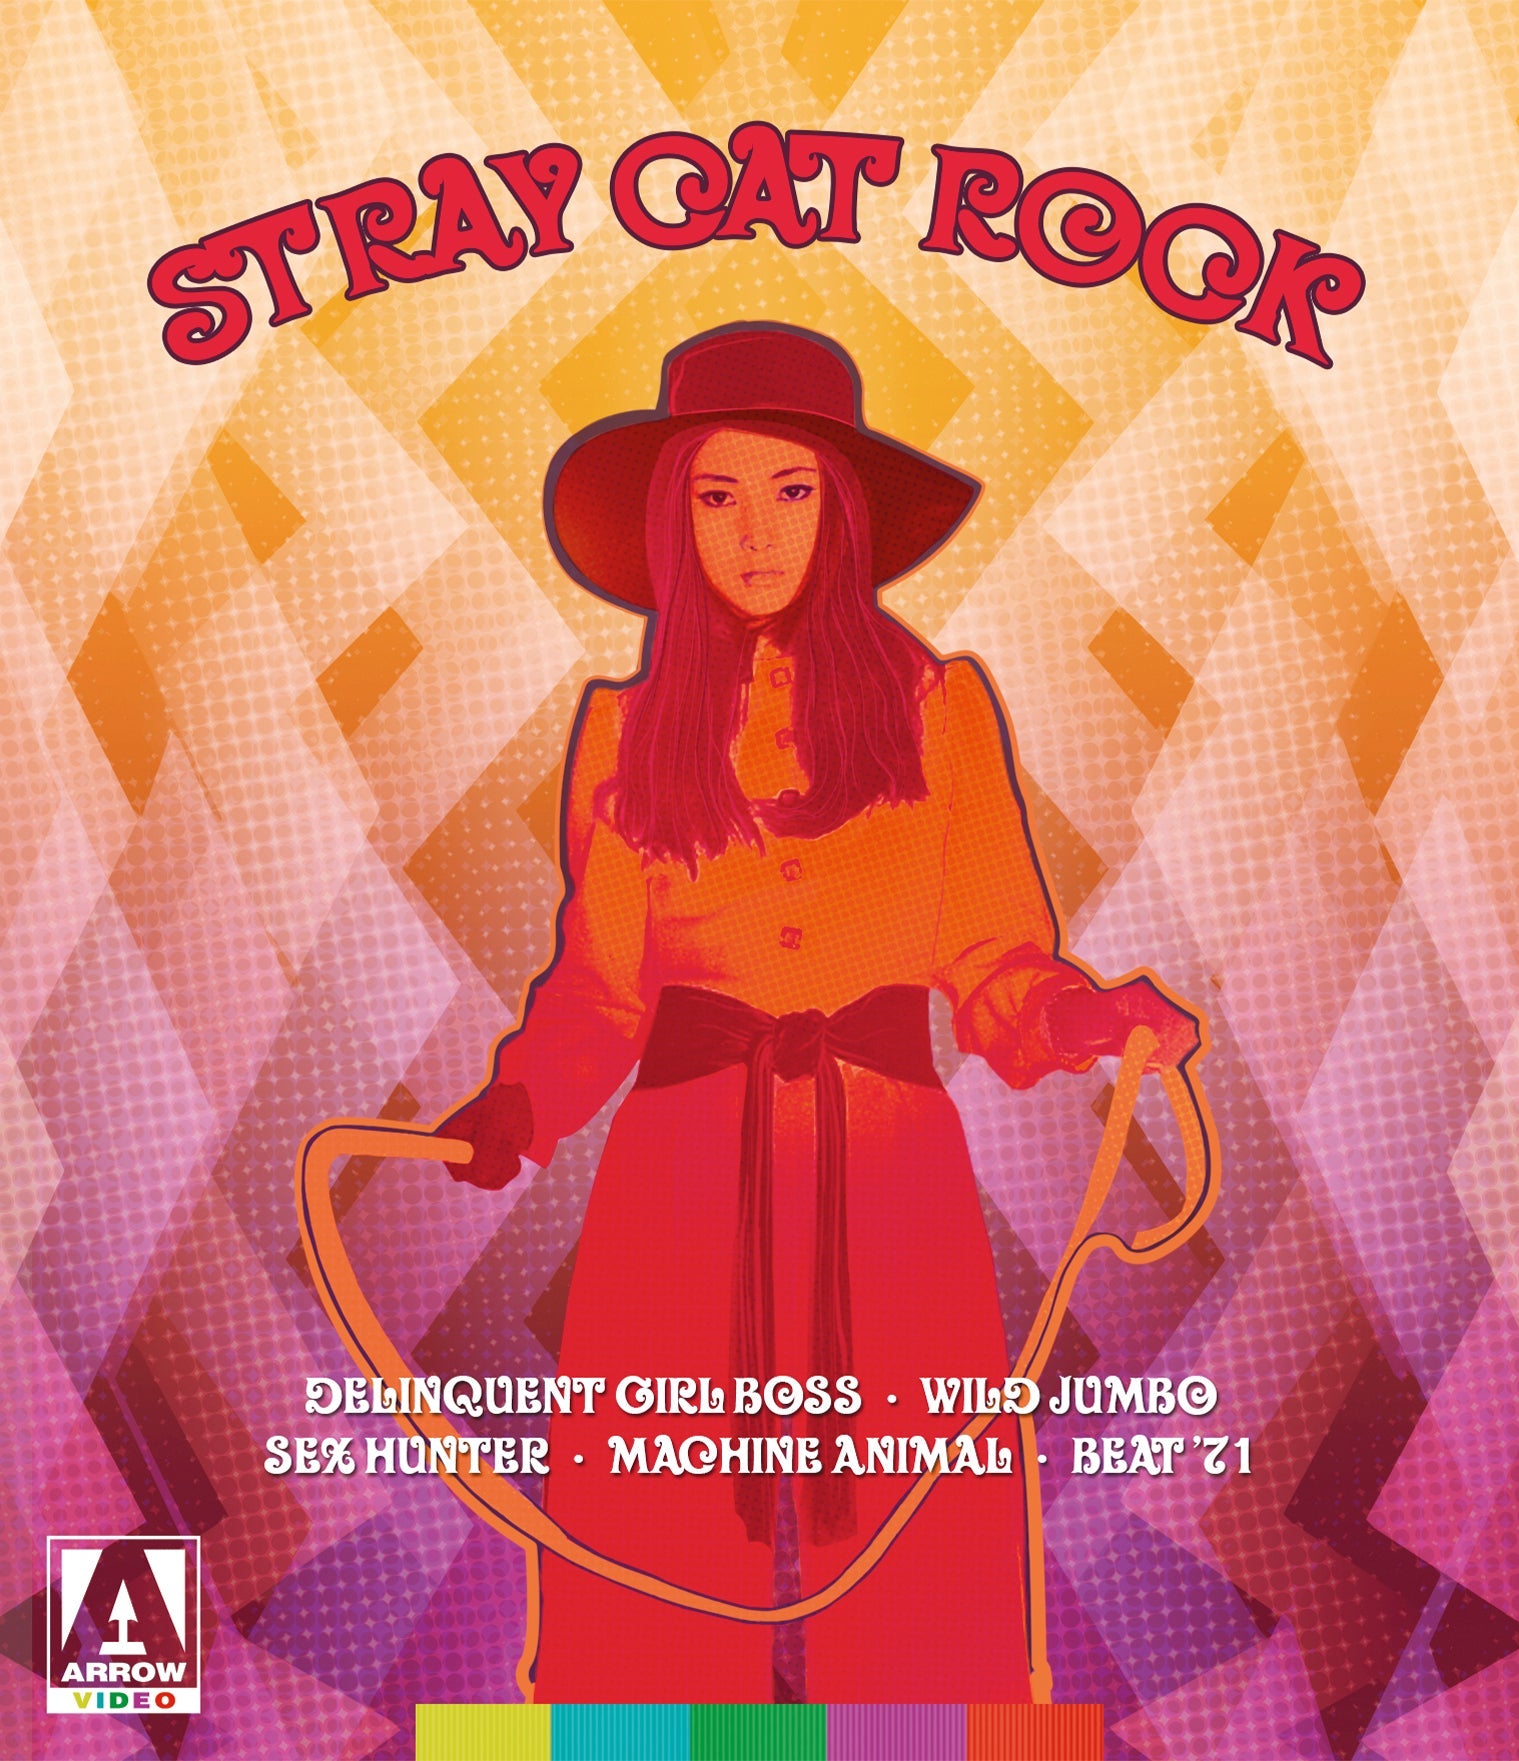 Stray Cat Rock Collection Blu-Ray Blu-Ray